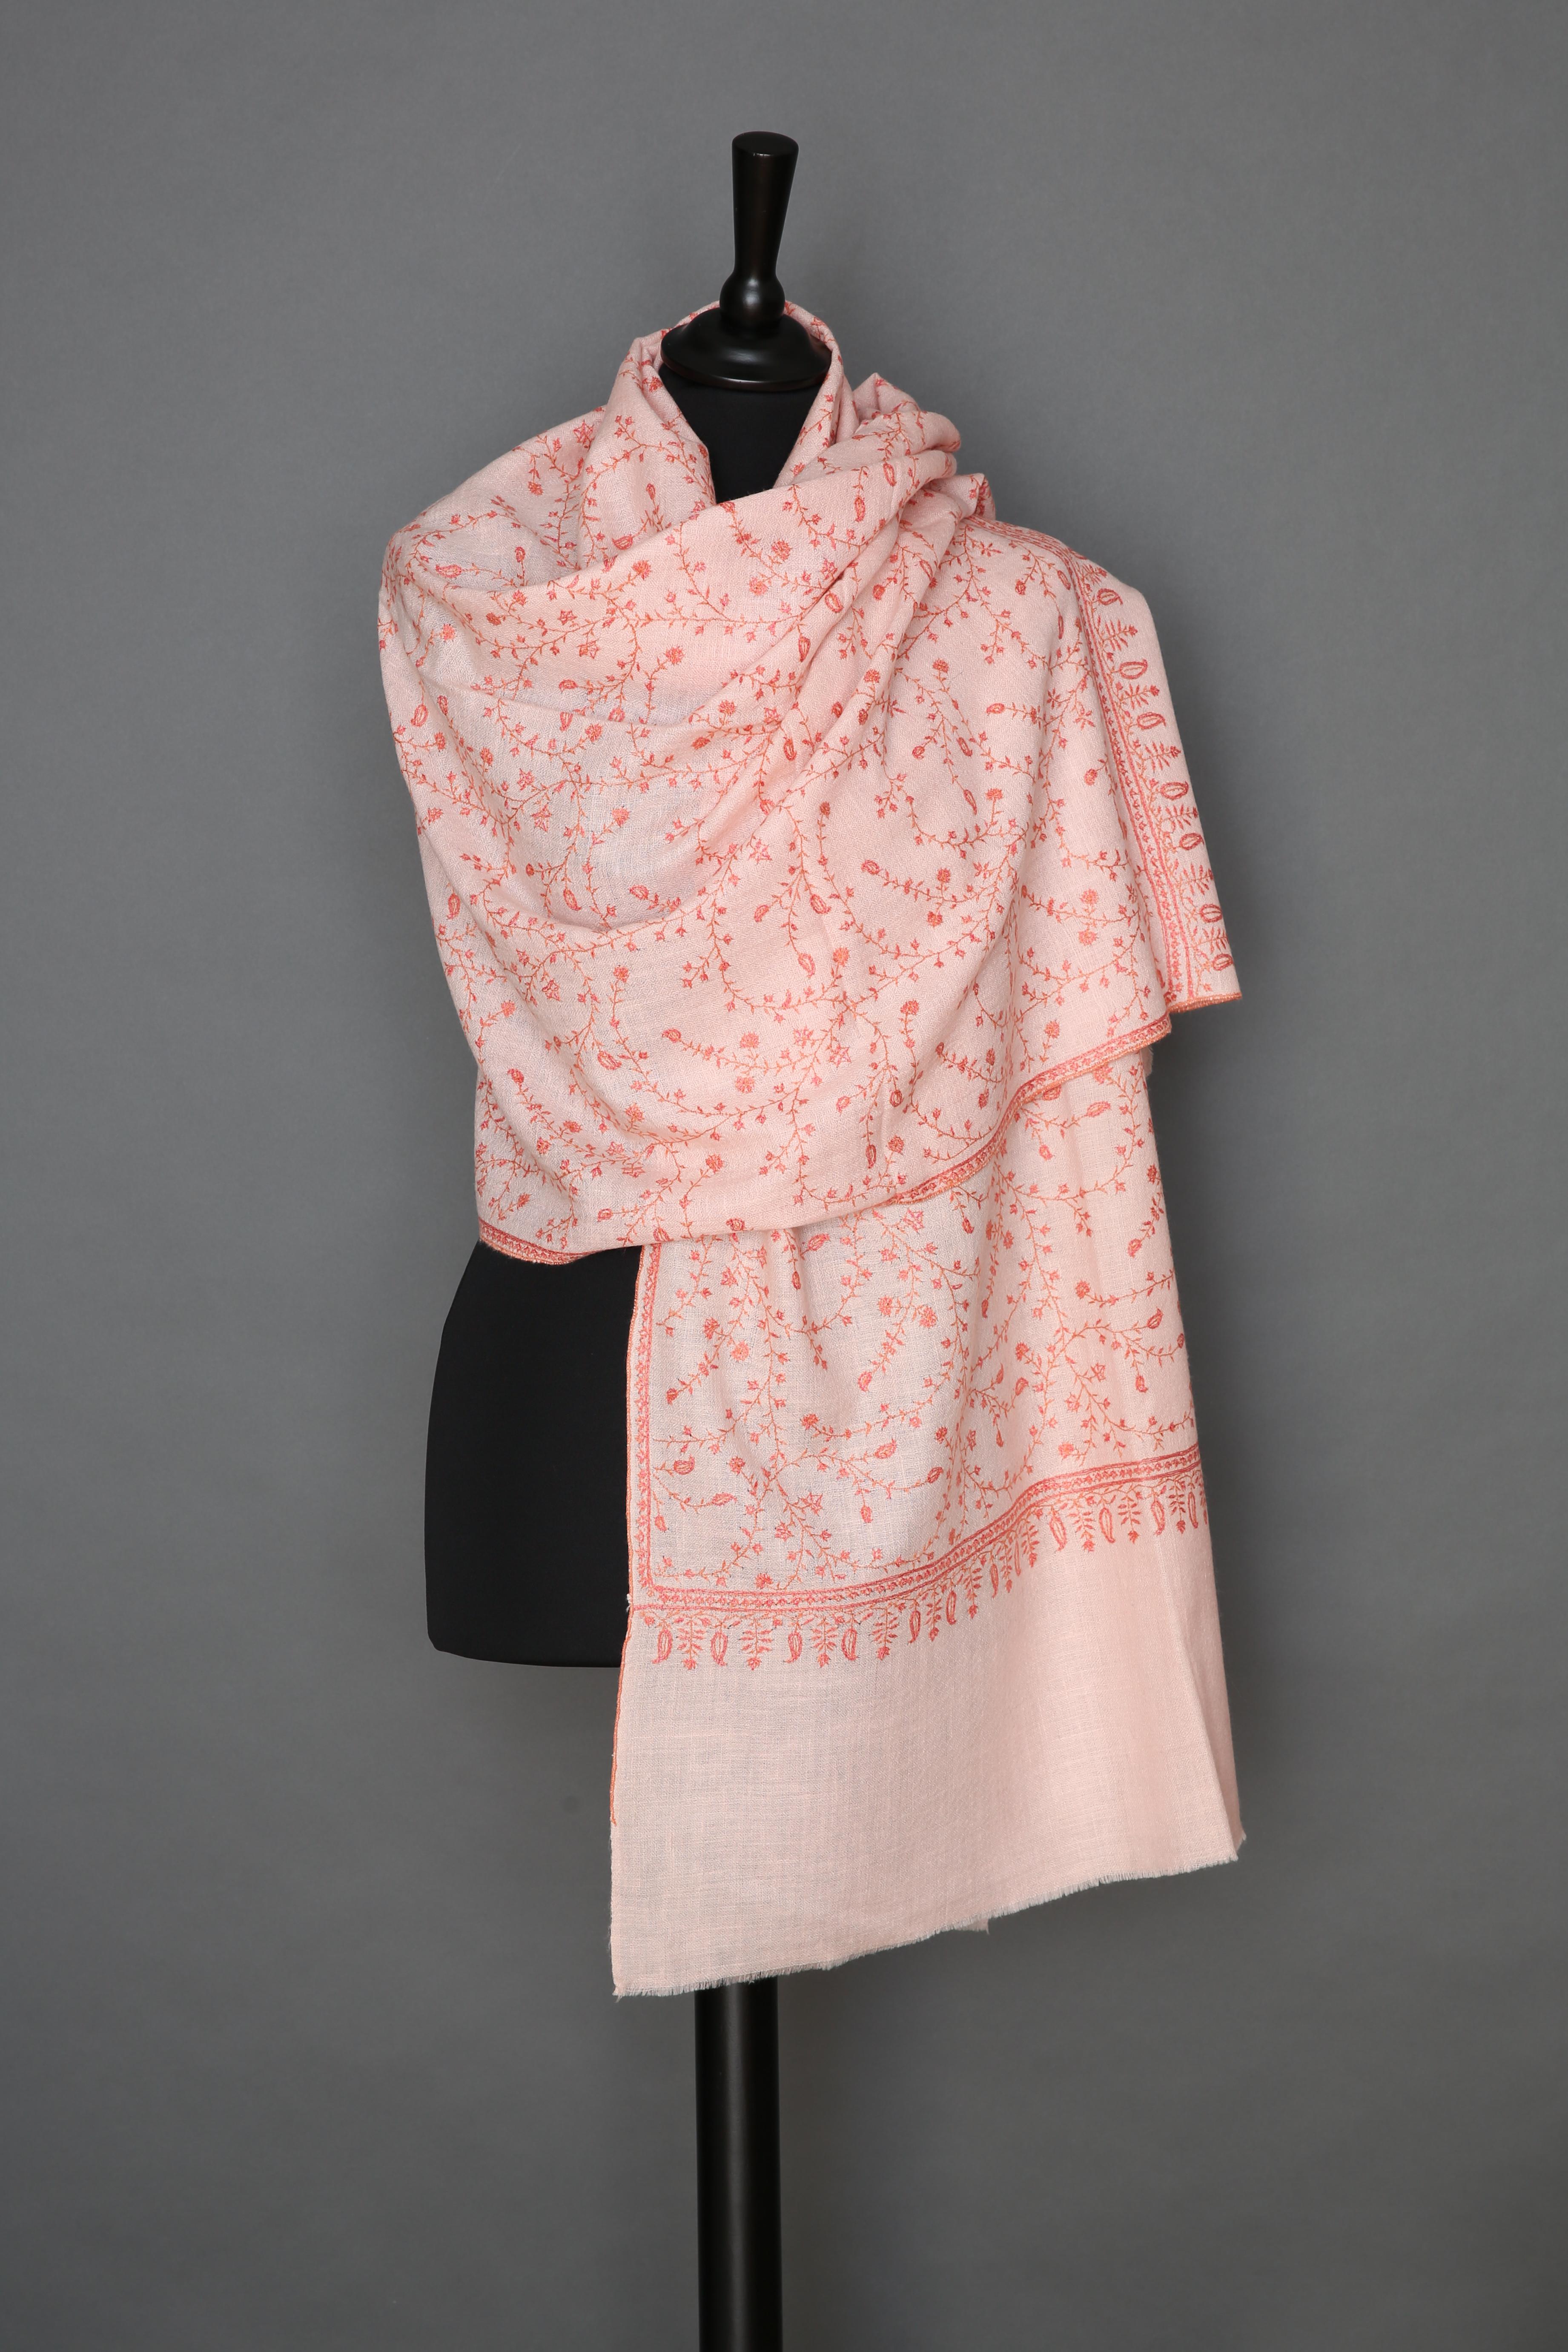 Women's or Men's Limited Edition Hand Embroidered Pale Pink 100% Cashmere Shawl made in Kashmir 